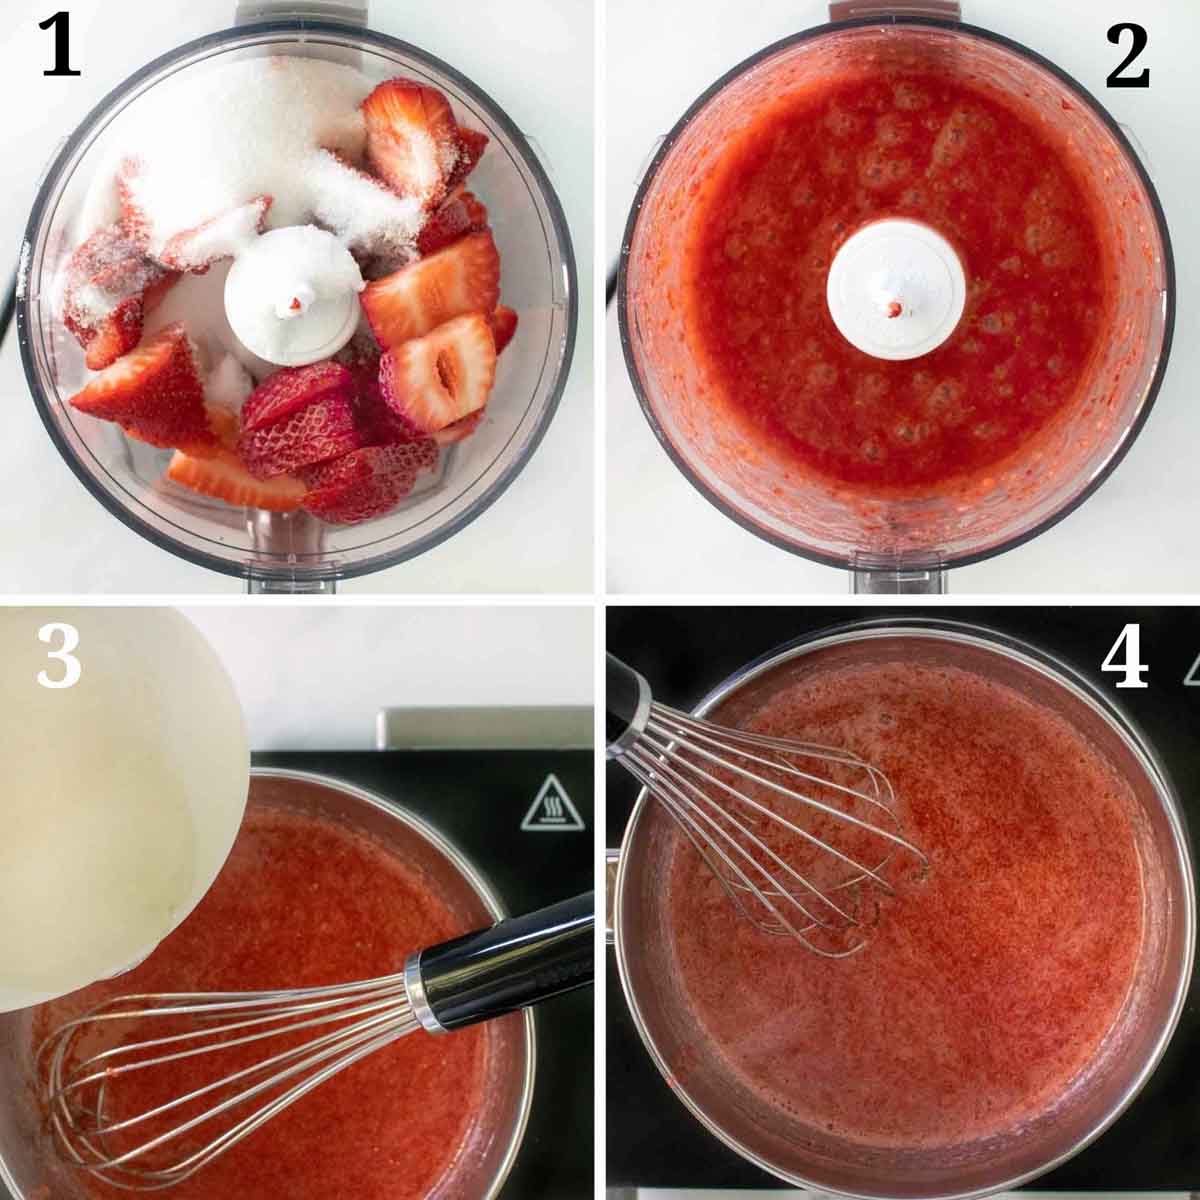 four images showing how to make strawberry mousse